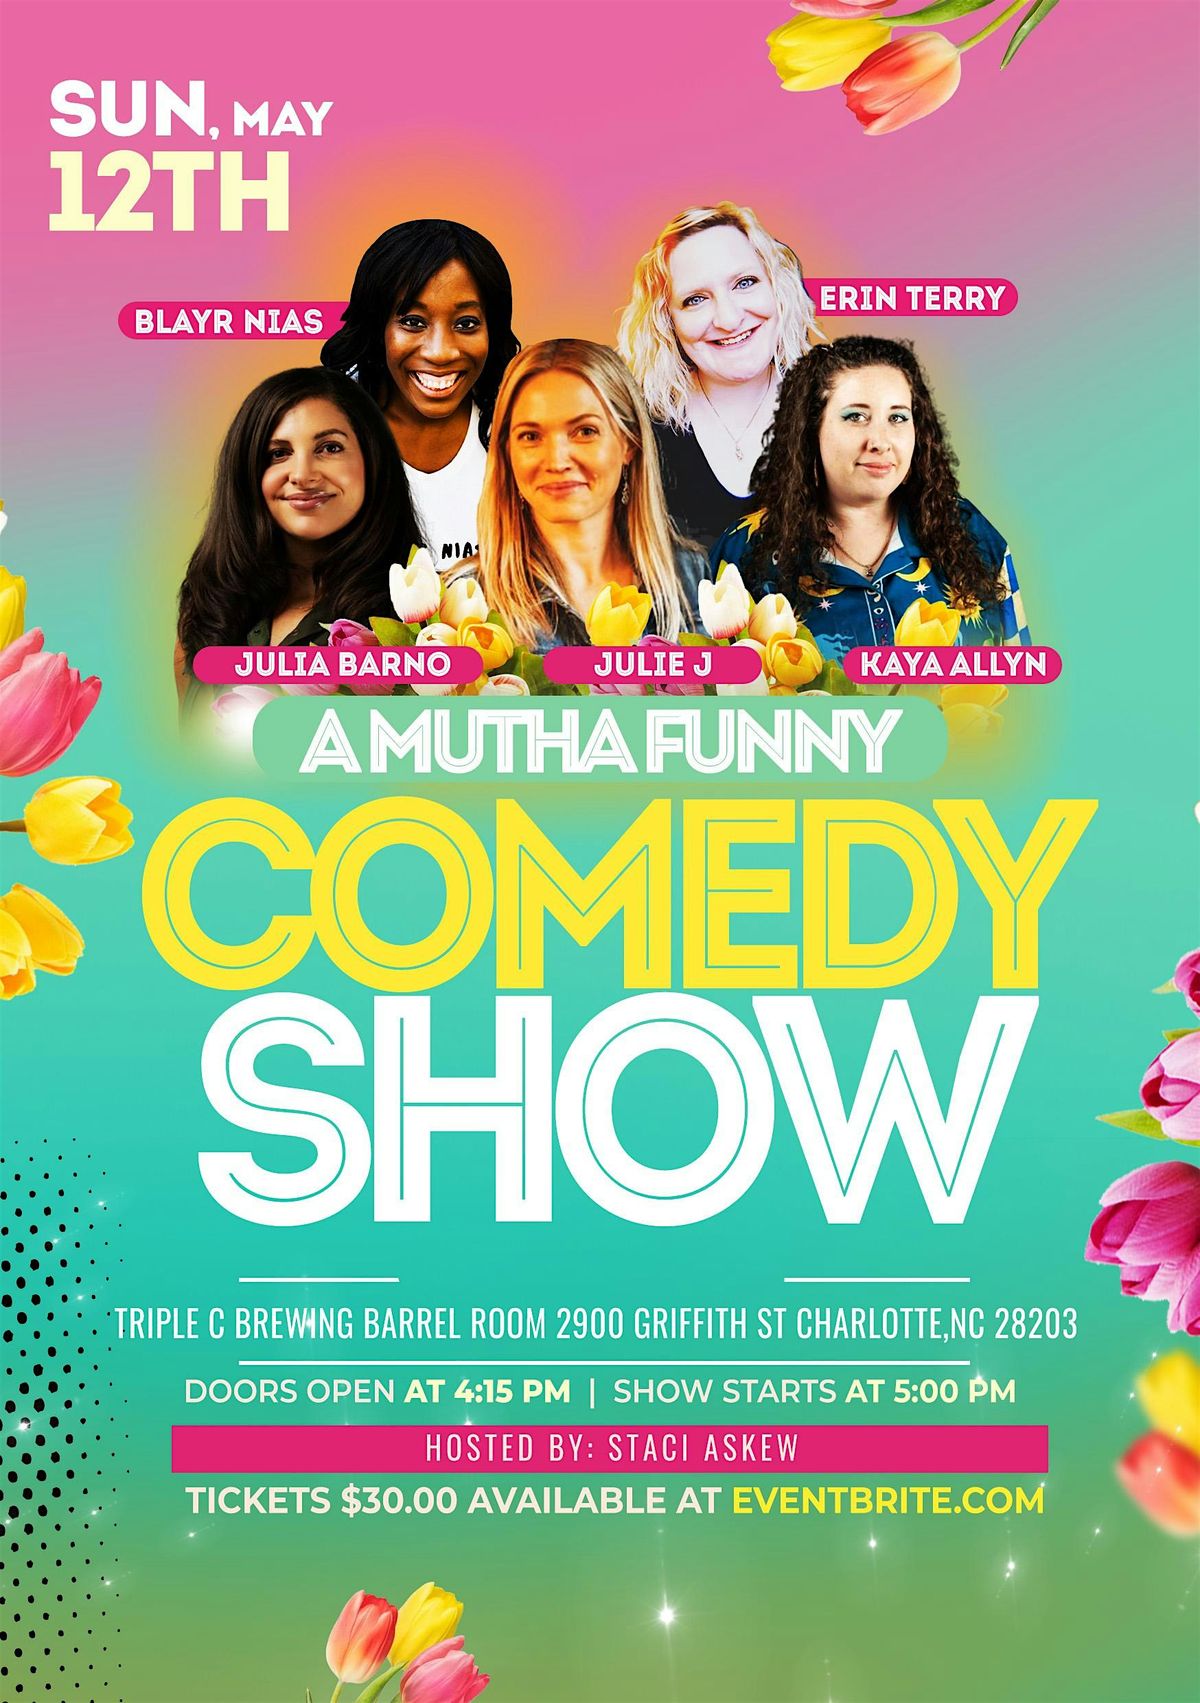 A Mutha Funny Comedy Show